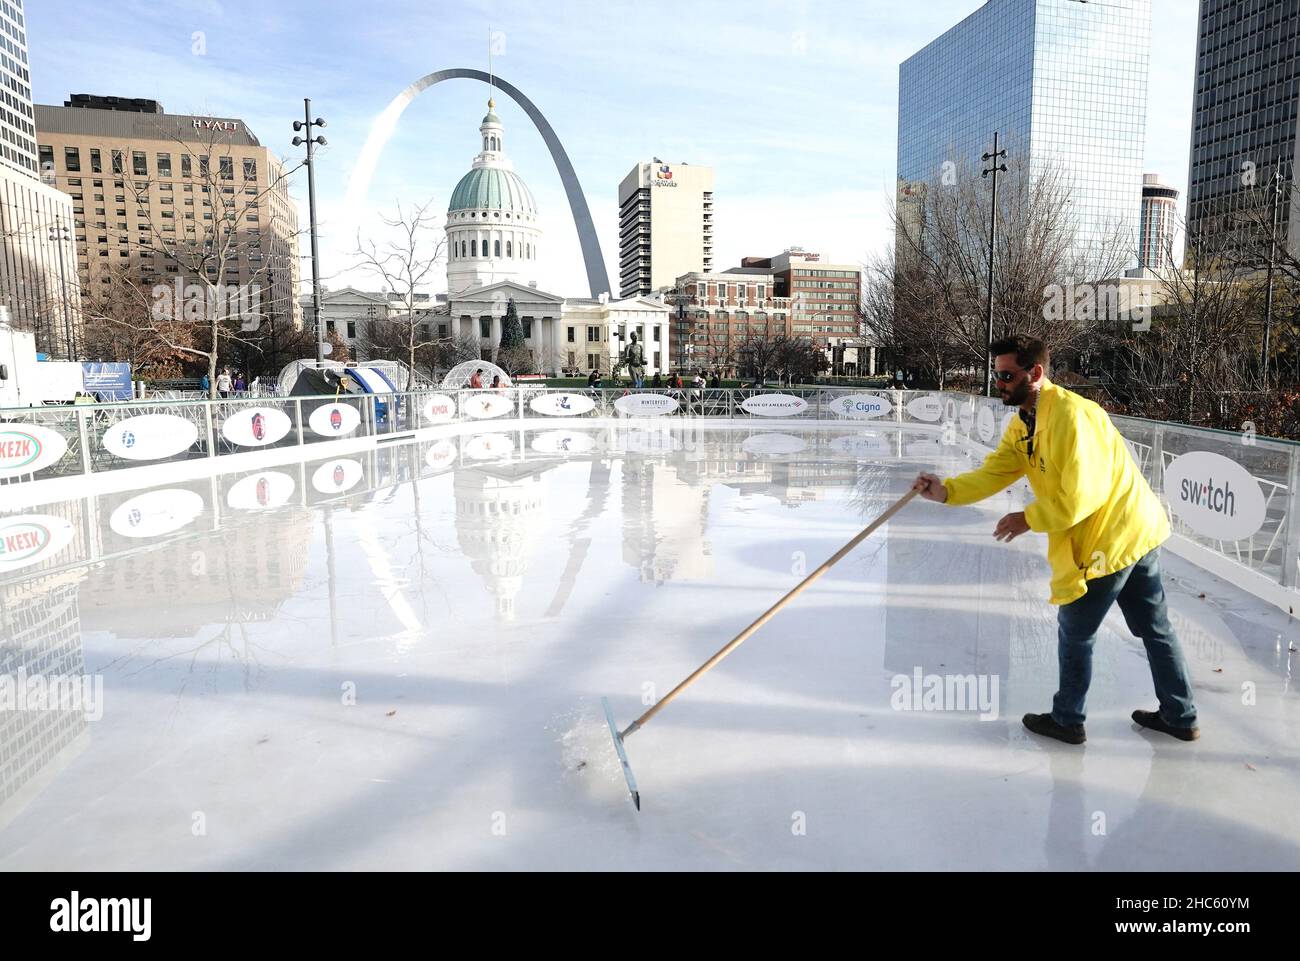 St. Louis, United States. 24th Dec, 2021. Ice attendant Eric Jablonski squeegees the water from the ice before opening at the Winterfest Ice Skating rink in Kiener Plaza in St. Louis on Friday December 24, 2021. A temperature of 73 degrees broke the 70-degree record set on December 16, 1889. Photo by Bill Greenblatt/UPI Credit: UPI/Alamy Live News Stock Photo